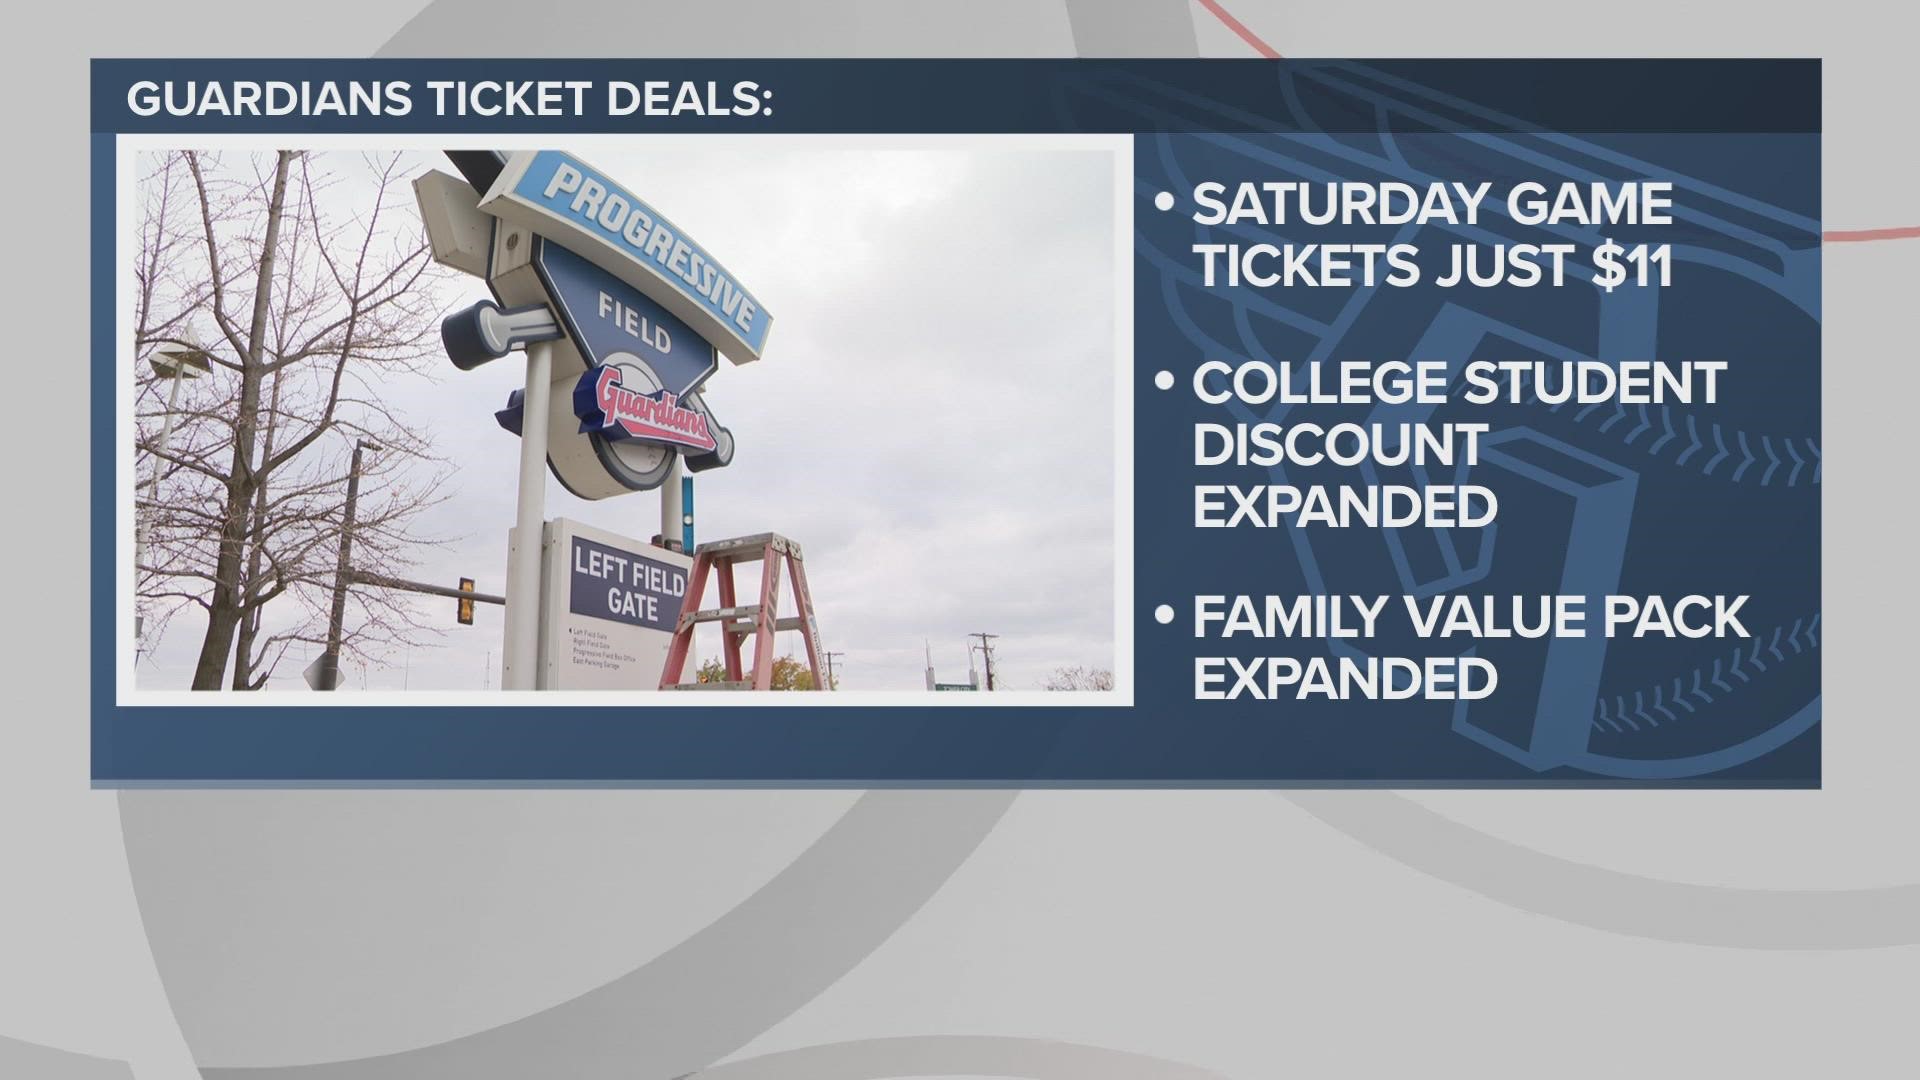 Deals include discounts for college students as well as $11 prices for upper-deck seats to this Saturday's game against the Seattle Mariners.